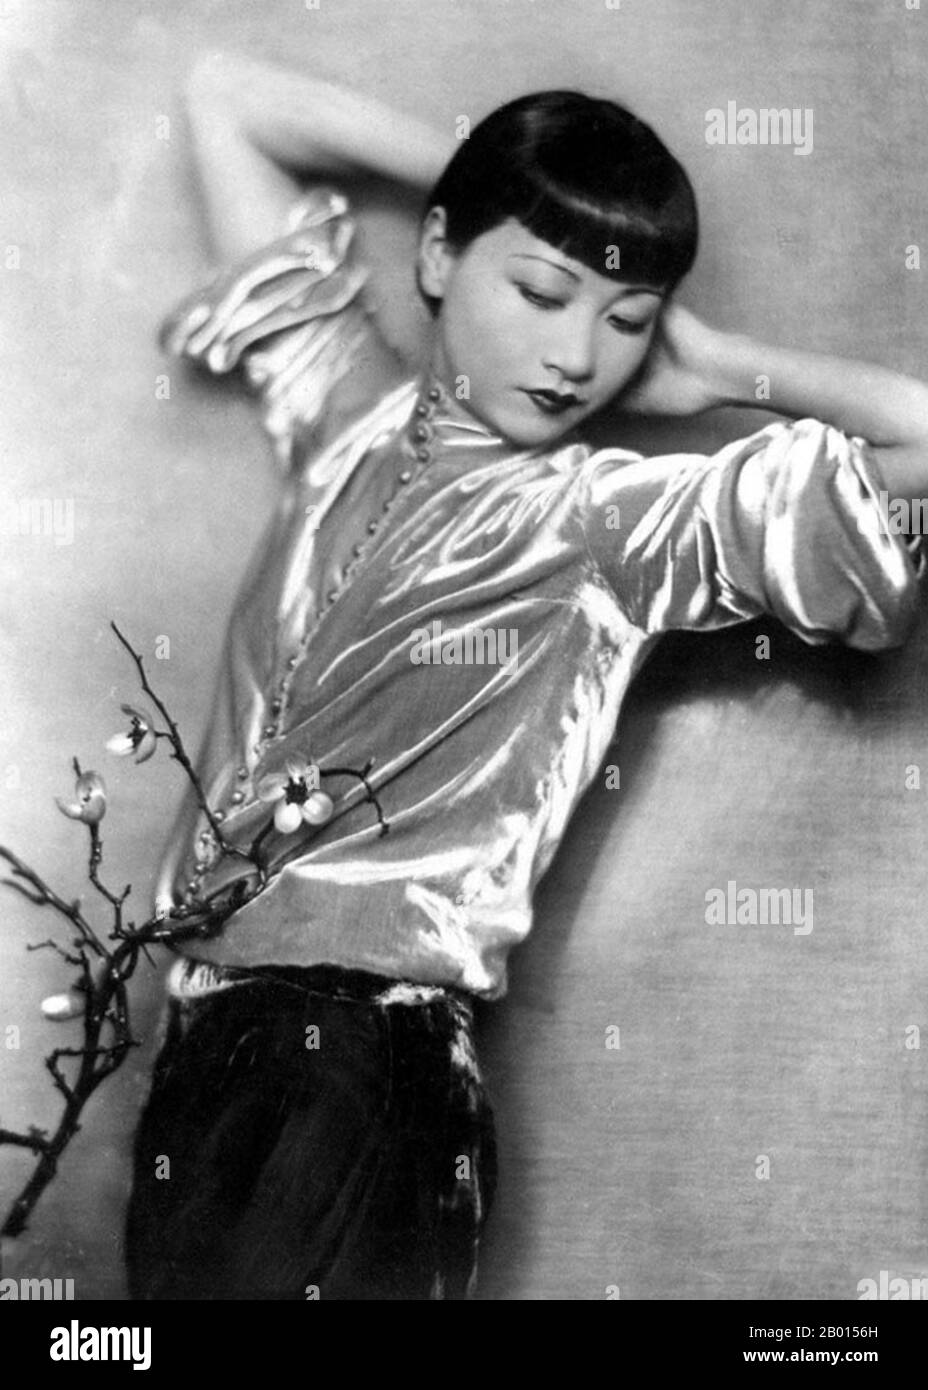 USA: Anna May Wong, Chinese-American movie star (January 3, 1905 – February 3, 1961), c. 1929-1930.  Anna May Wong was an American actress, the first Chinese American movie star, and the first Asian American to become an international star. Her long and varied career spanned both silent and sound film, television, stage, and radio.  Born near the Chinatown neighborhood of Los Angeles to second-generation Chinese-American parents, Wong became infatuated with the movies and began acting in films at an early age. Stock Photo